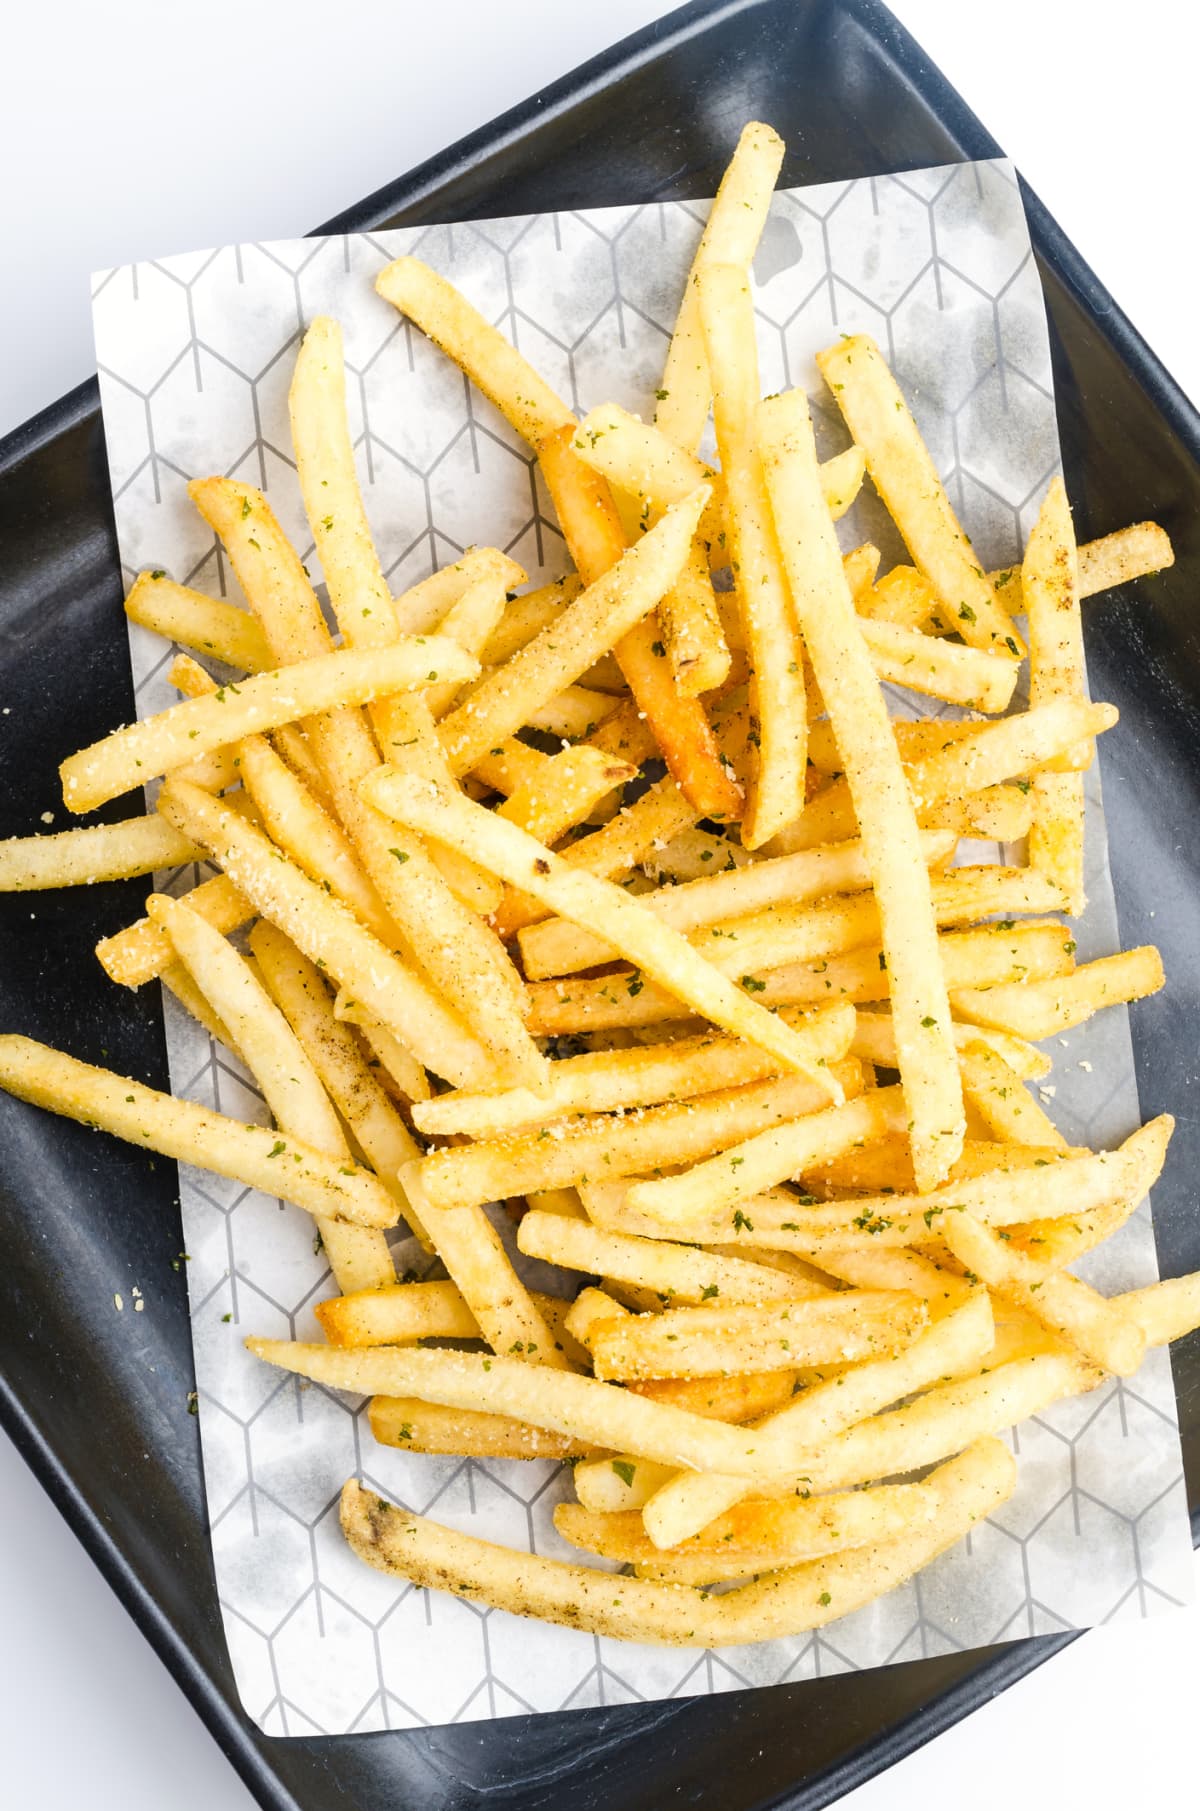 Seasoned french fries on a baking tray on a white background